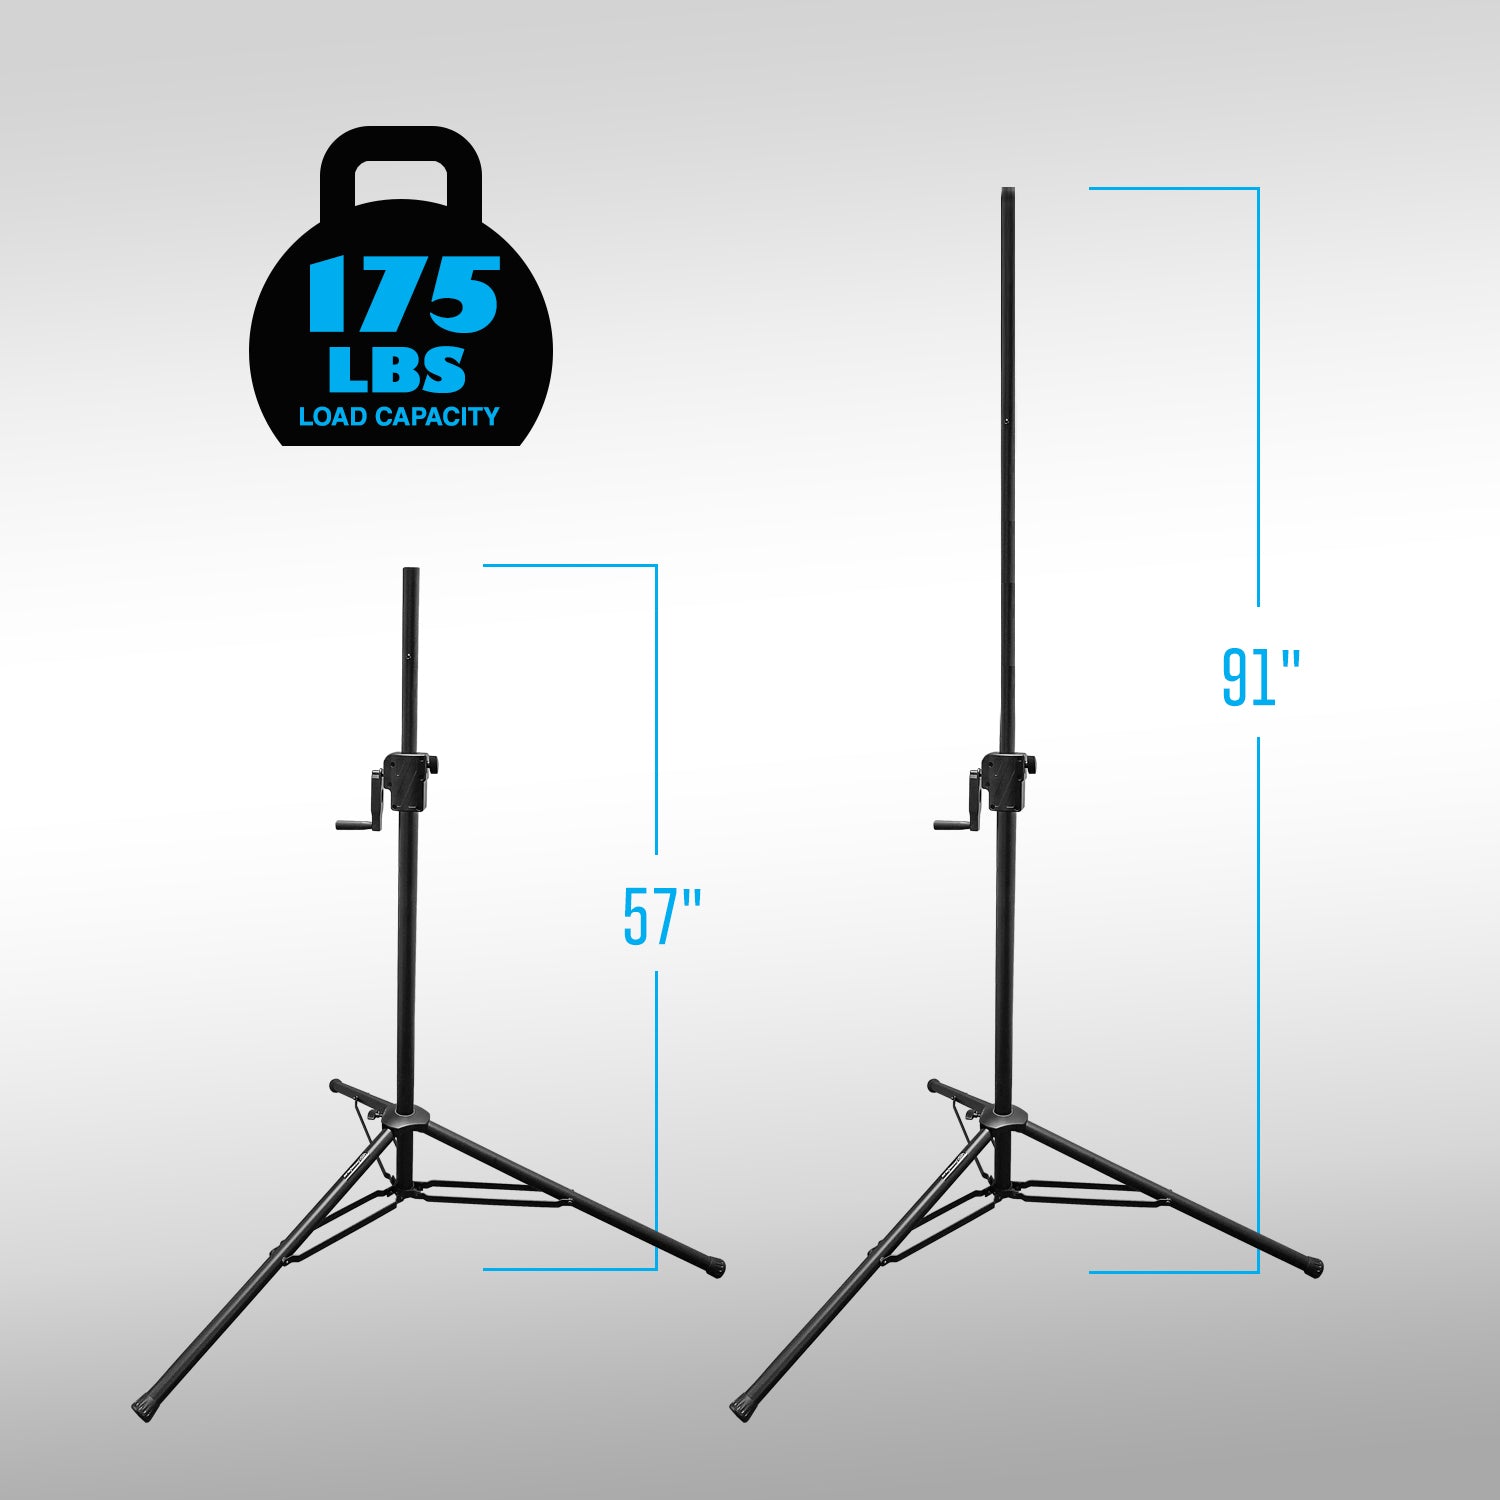 AxcessAbles Heavy-Duty Crank-up DJ Stand with Carry Bag | 175LB Load Capacity | Crank Up Light Stand | Crank Up DJ Speaker Tripod Stand | Stage Lighting Stand (SMX-266 Crank Stand -1 Pack)